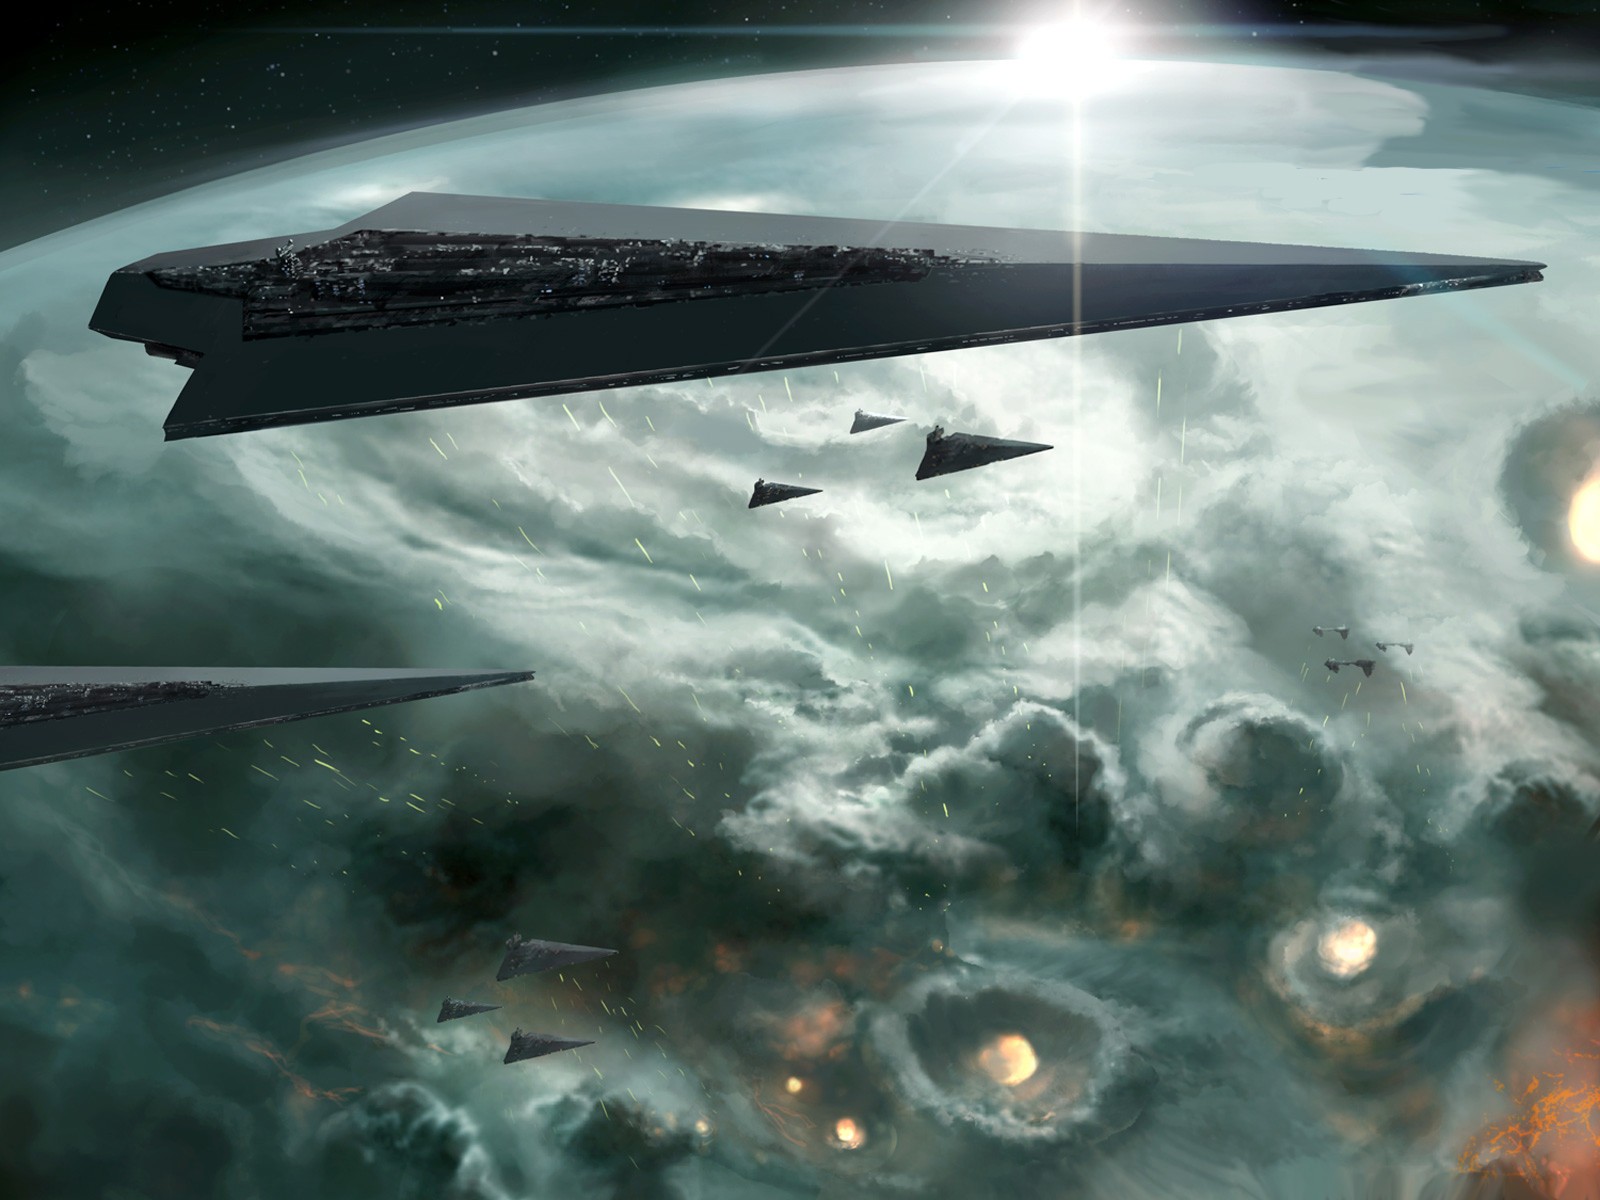 General 1600x1200 space Star Wars Super Star Destroyer spaceship Imperial Forces Star Destroyer science fiction vehicle planet